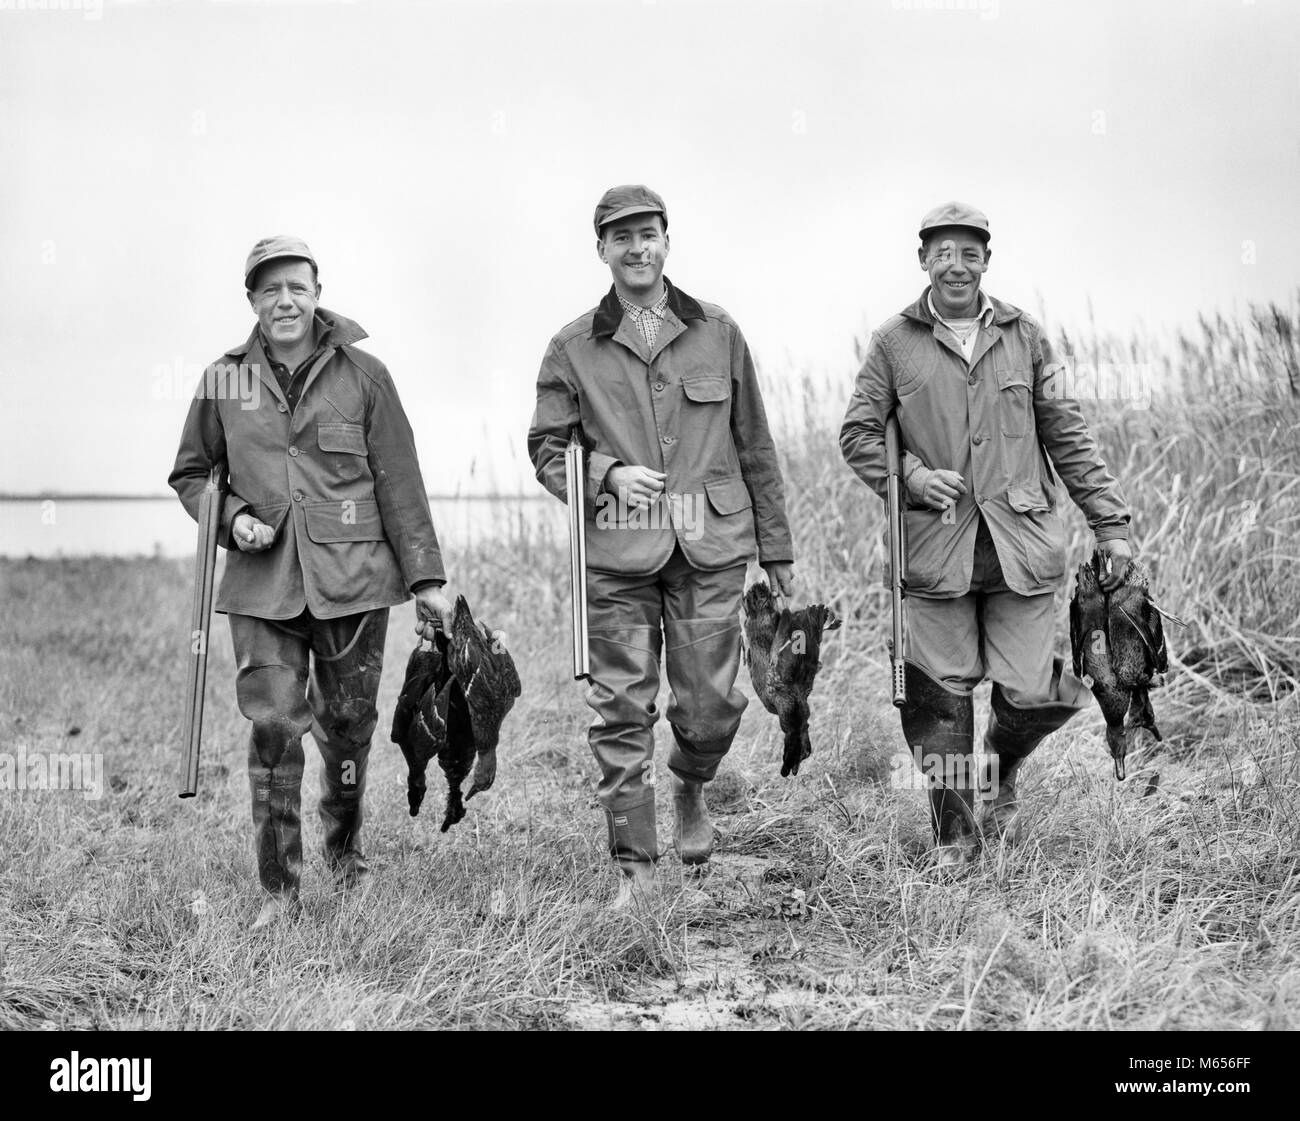 1950s THREE MEN LOOKING AT CAMERA HOLDING SHOTGUNS WALKING THROUGH GRASSY WETLANDS EACH CARRYING BRACE OF DUCKS - d3634 HAR001 HARS HAPPINESS CHEERFUL ADVENTURE RELAXATION EXCITEMENT EXTERIOR RECREATION TRIO PRIDE SMILES JOYFUL COOPERATION GRASSY SMALL GROUP OF ANIMALS SMALL GROUP OF PEOPLE FIREARM FIREARMS HUNTERS MALES MID-ADULT MID-ADULT MAN SHOTGUNS WETLANDS B&W BLACK AND WHITE BRACE CAUCASIAN ETHNICITY DOUBLE BARREL LOOKING AT CAMERA OLD FASHIONED PERSONS Stock Photo